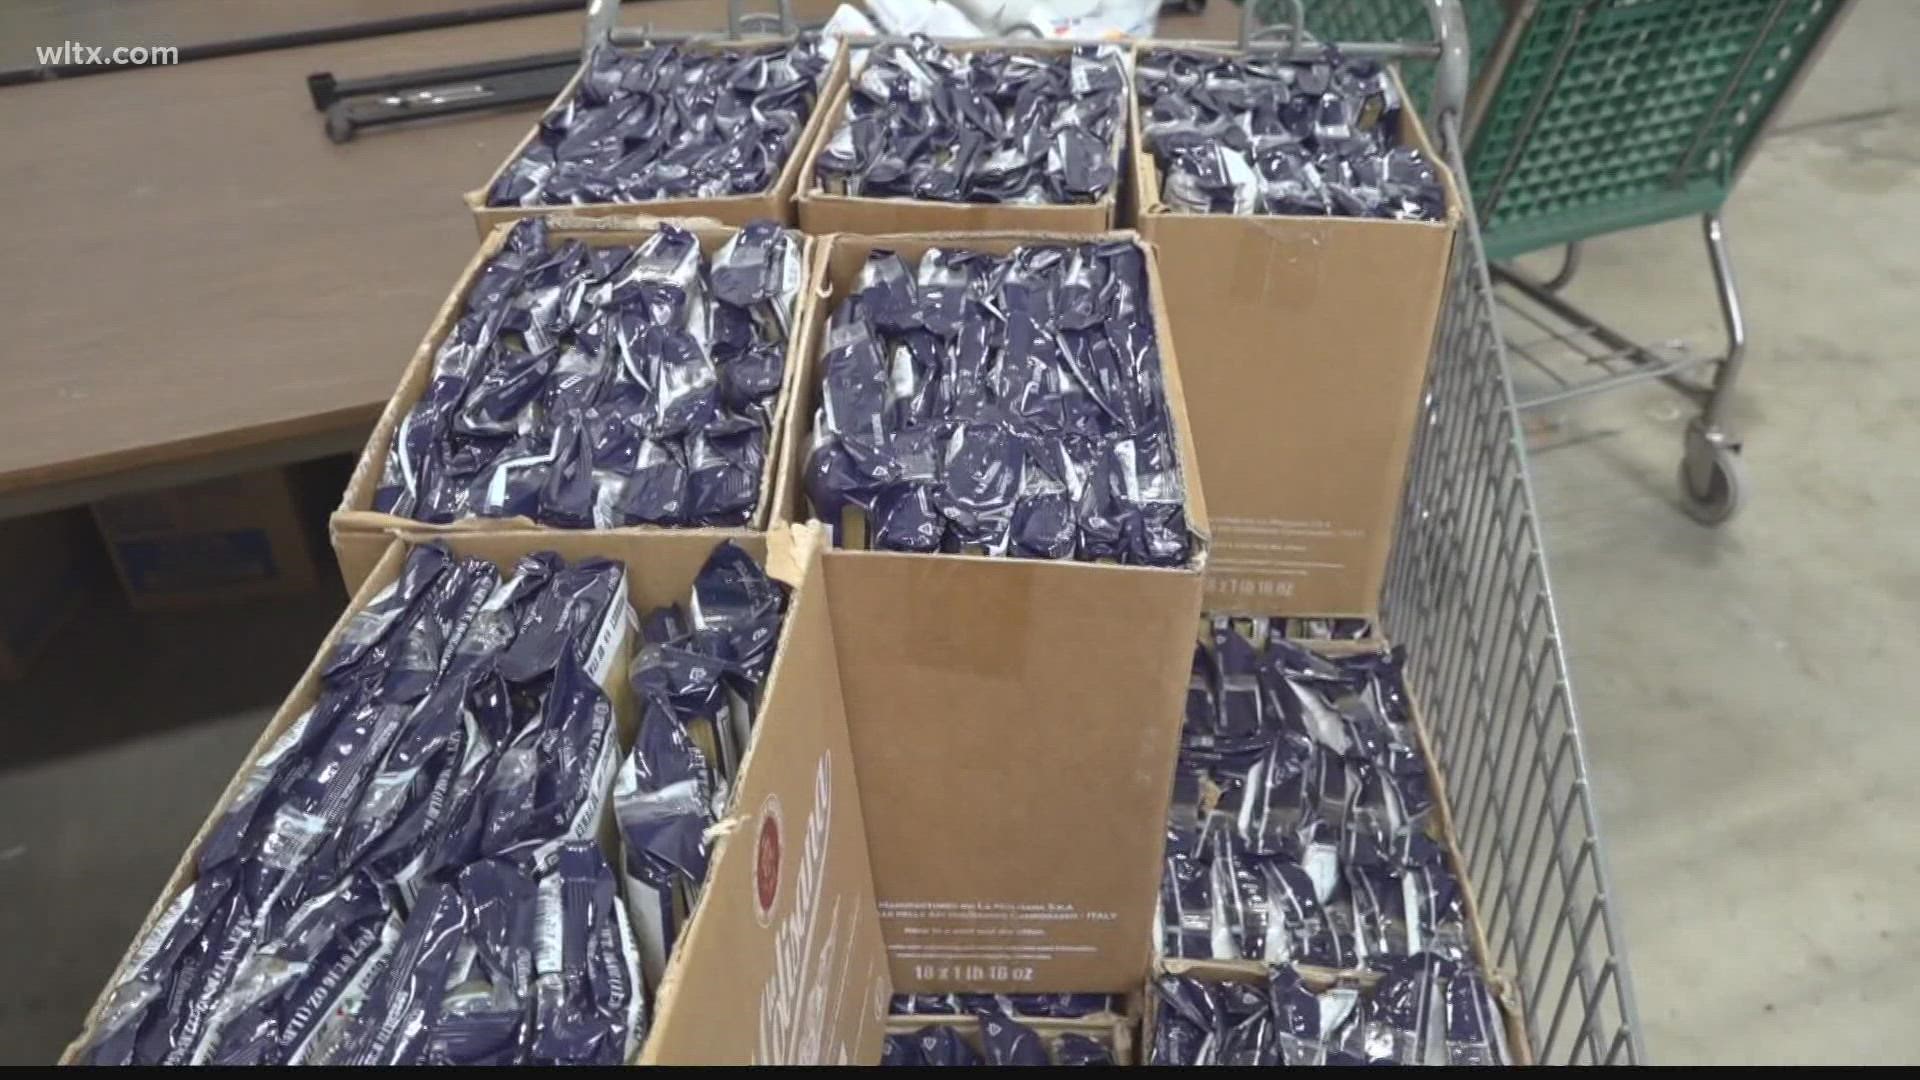 A woman donated 536 pounds of pasta and others have donated as well after much of the pantry's boxed goods were destroyed by moths.